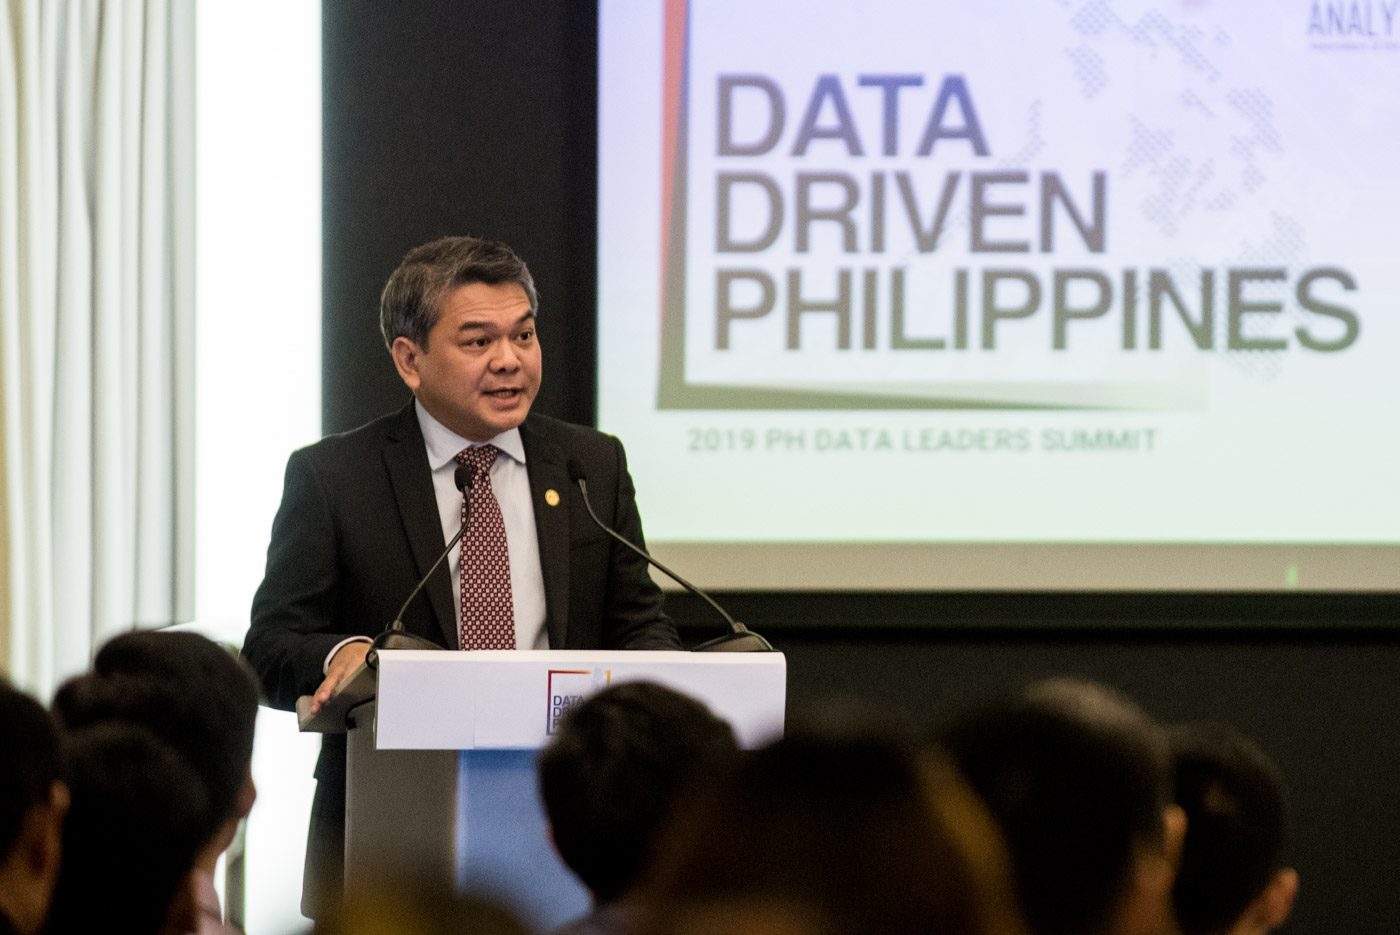 Industry leaders ask the question: ‘How do you make a data-driven Philippines?’